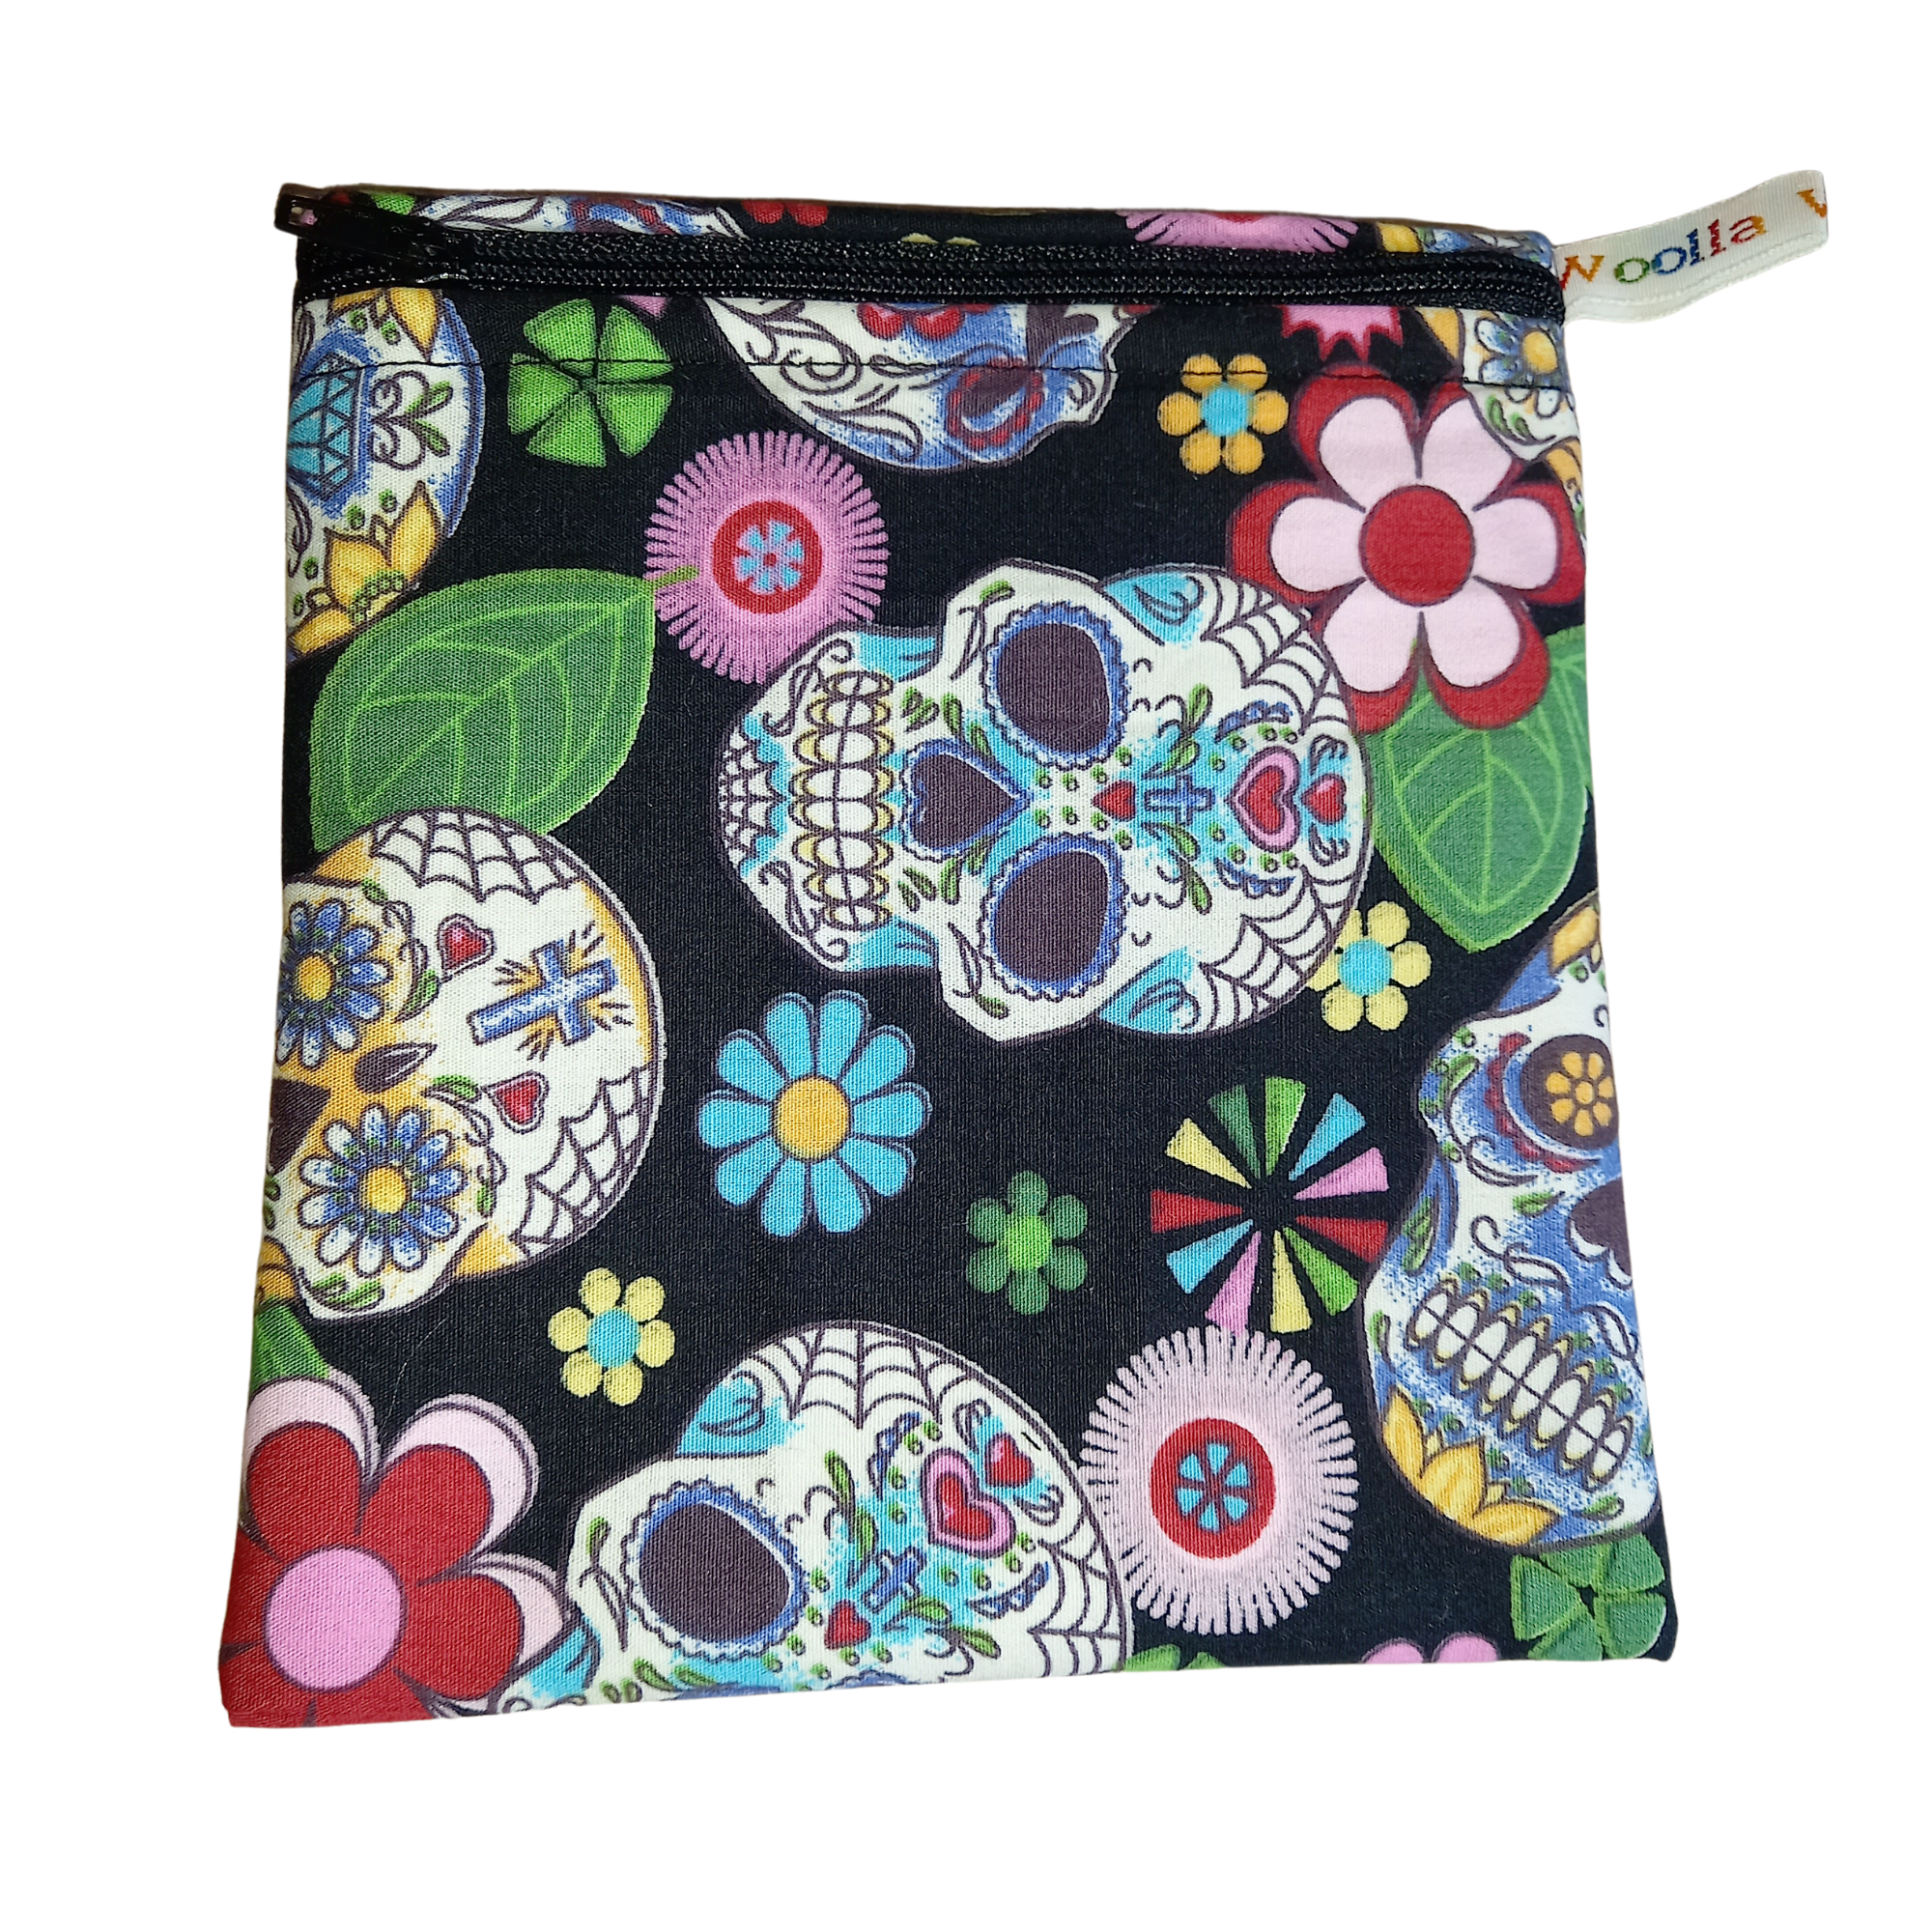 Black Sugar Skull - Small Poppins Pouch Washable Reusable Snack Bag